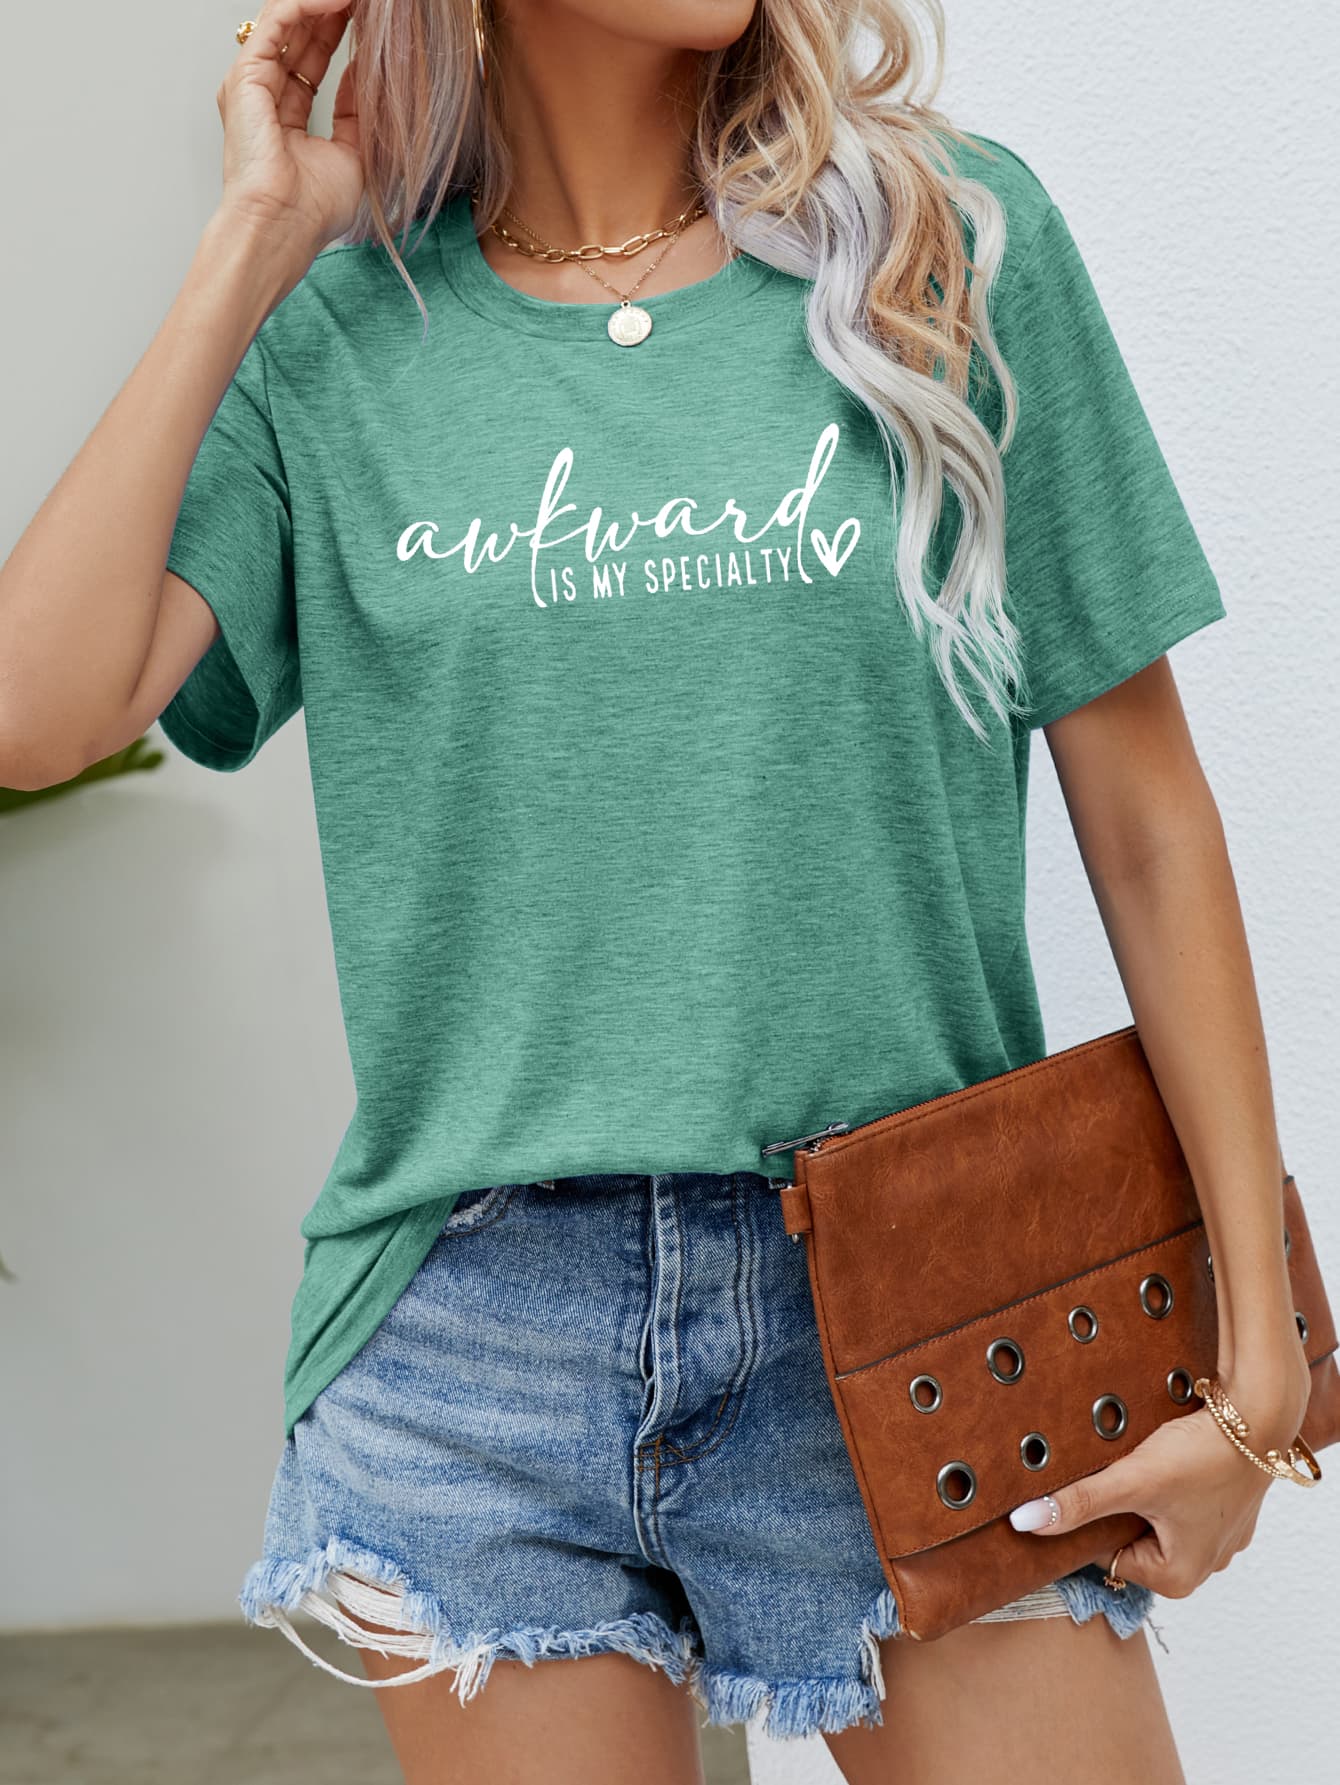 AWKWARD IS MY SPECIALTY Graphic Tee - Green / S - T-Shirts - Shirts & Tops - 10 - 2024